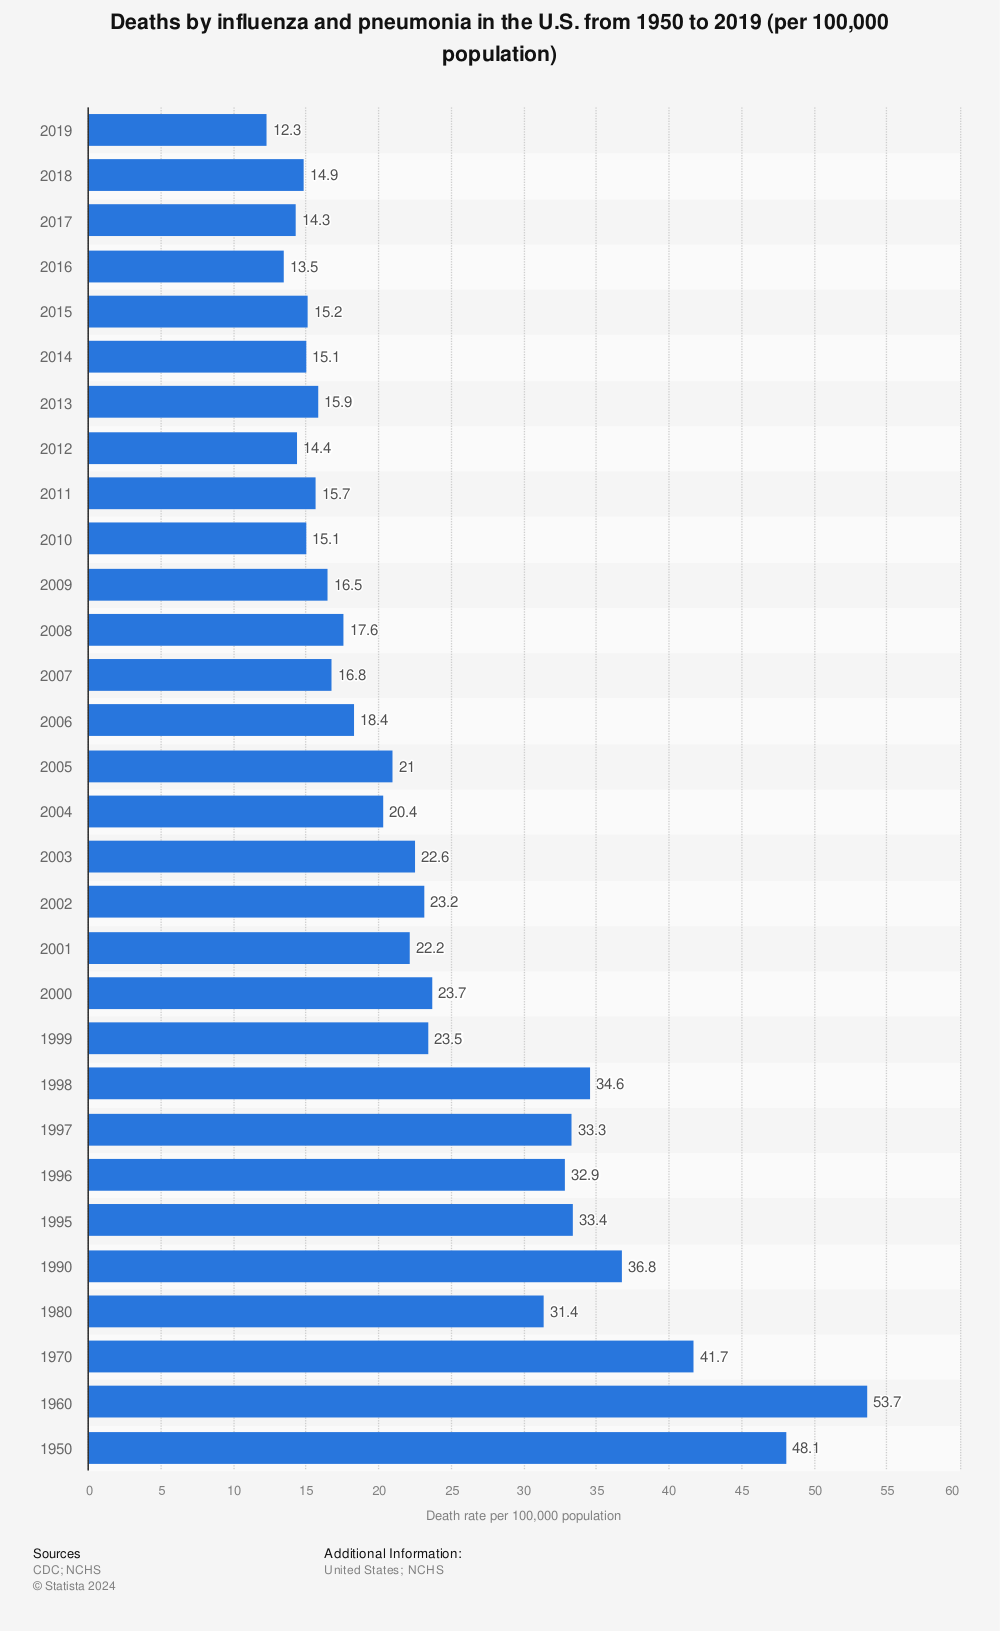 Statistic: Deaths by influenza and pneumonia in the U.S. from 1950 to 2019 (per 100,000 population) | Statista